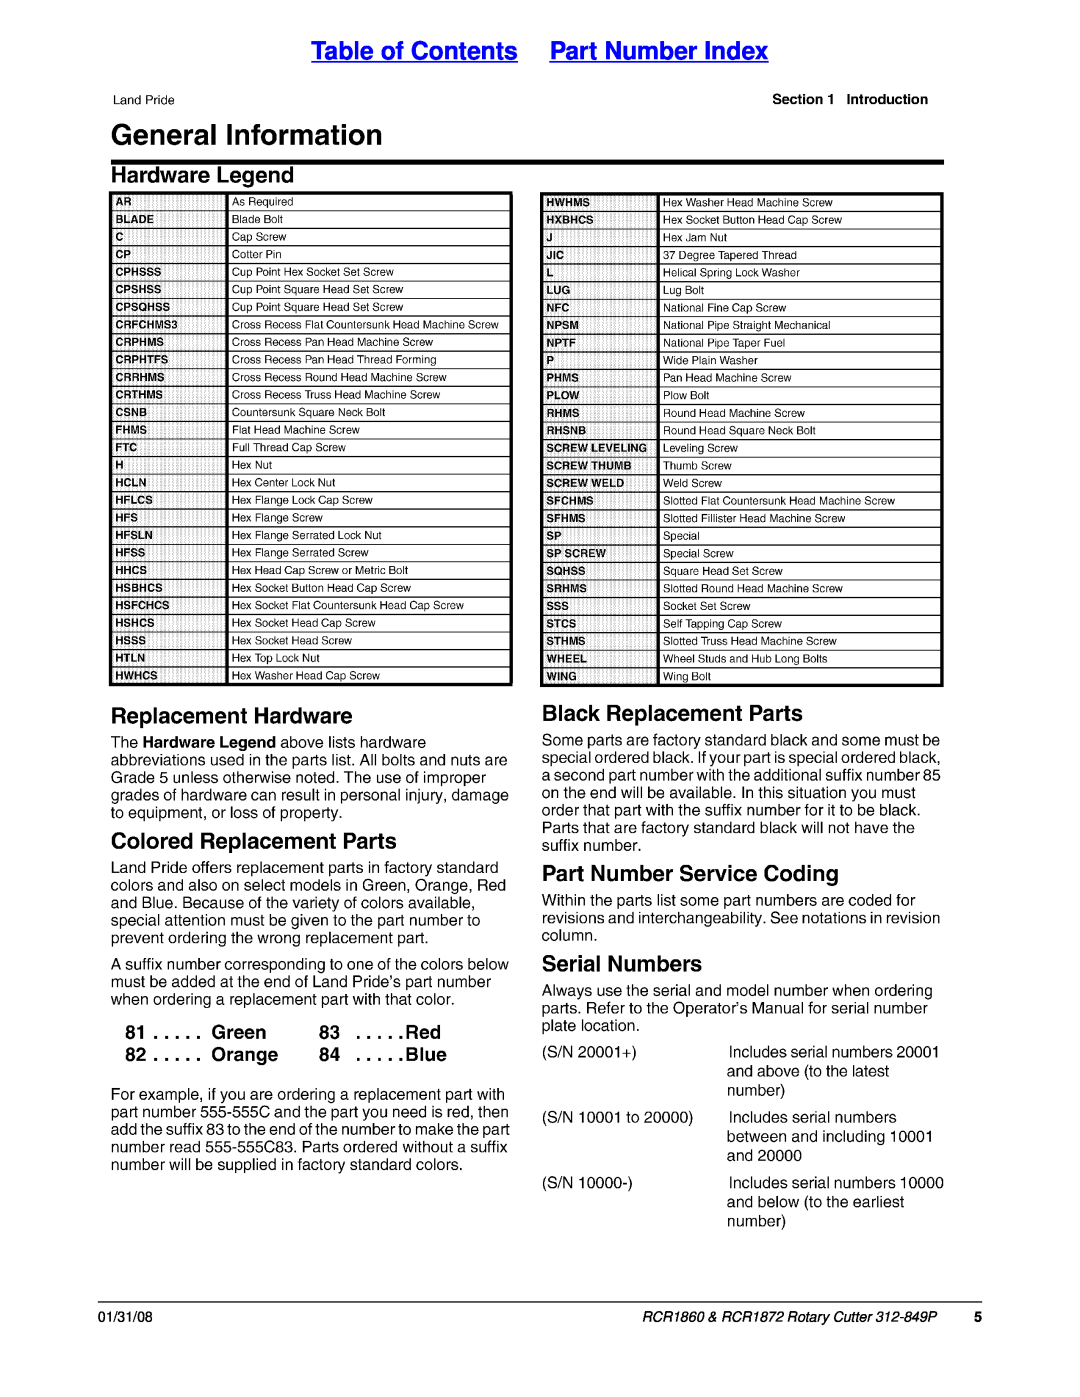 Land Pride manual Table of Contents Part Number Index, RCR1860 & RCR1872 Rotary Cutter 312-849P, 01/31/08 